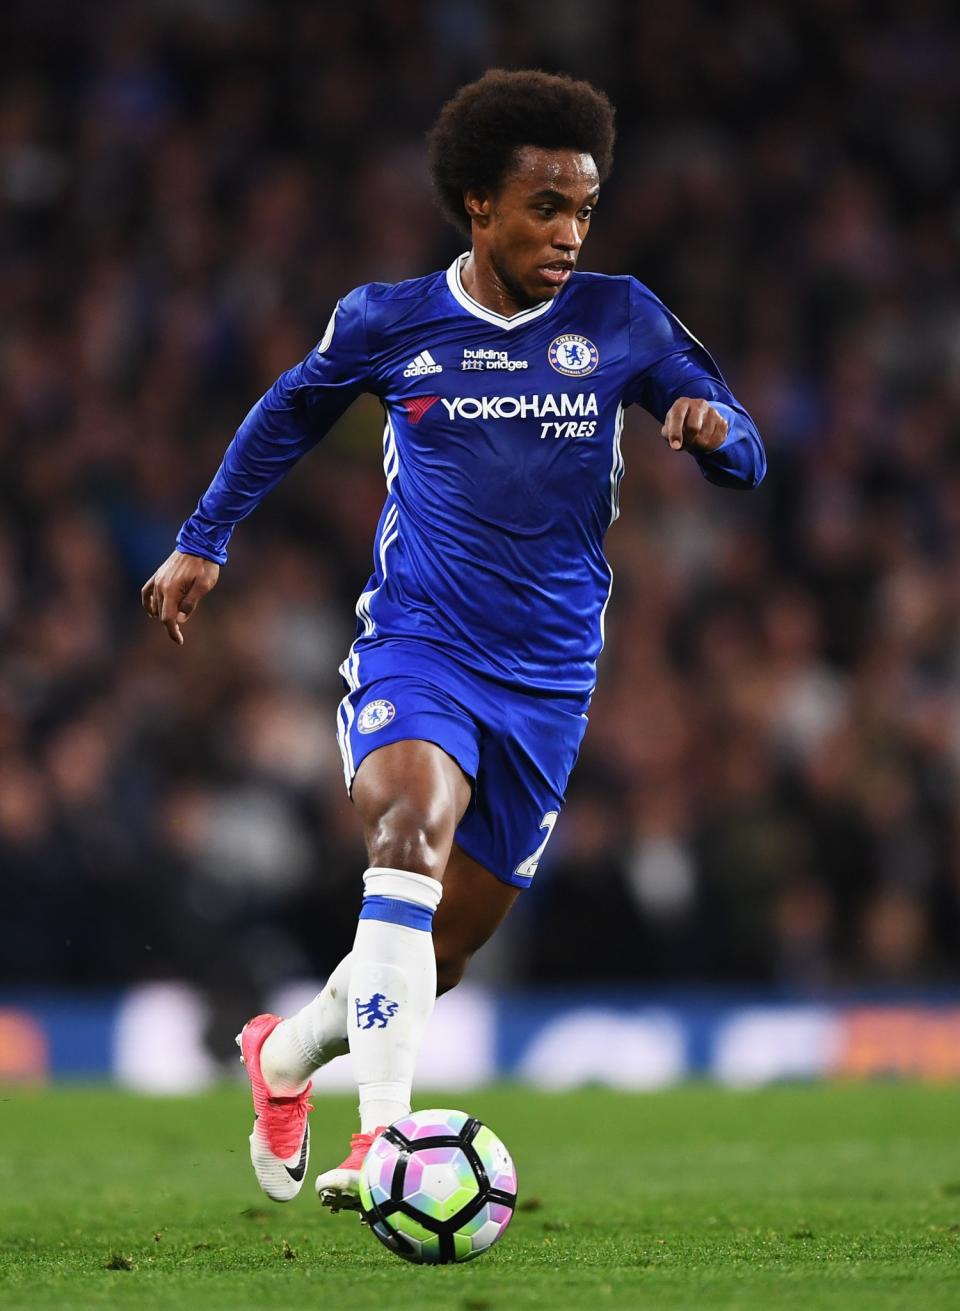 Willian is highly-sought after but has spent the season in and out of the team